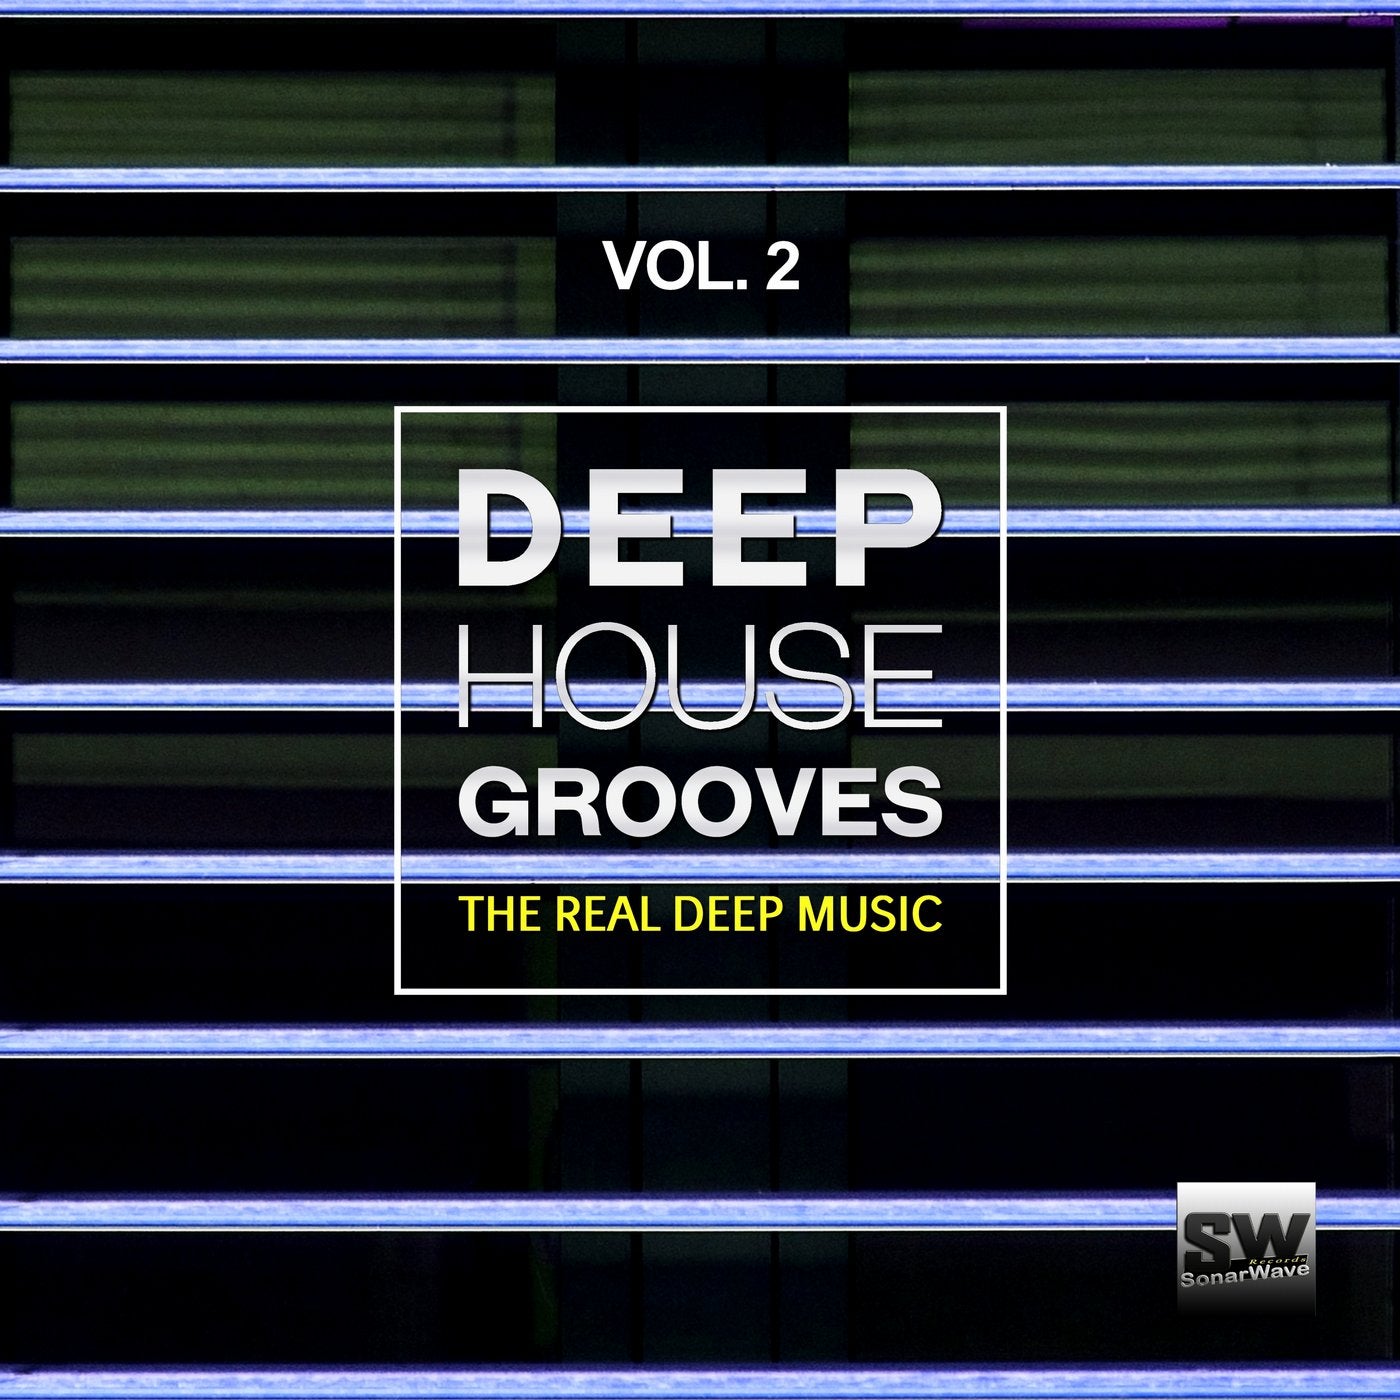 Deep House Grooves, Vol. 2 (The Real Deep Music)